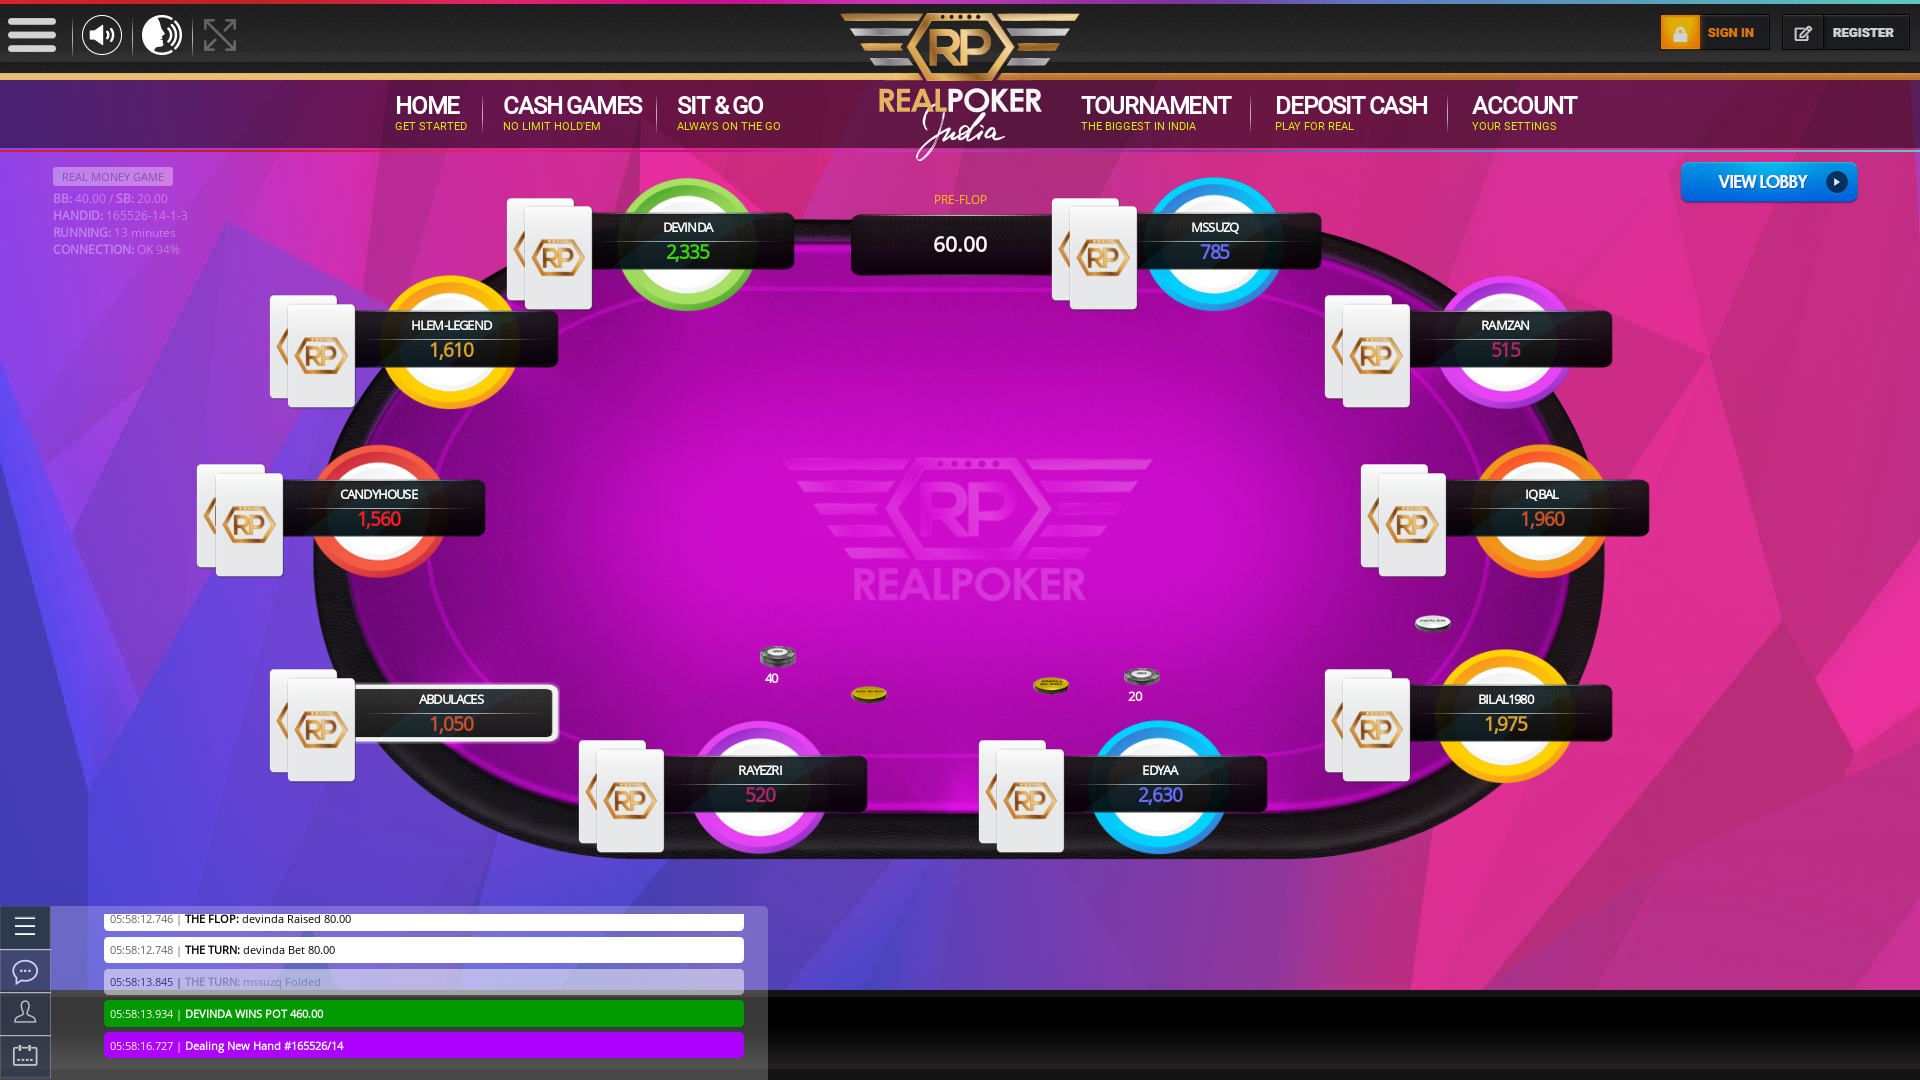 Kota Poker India from 6th August